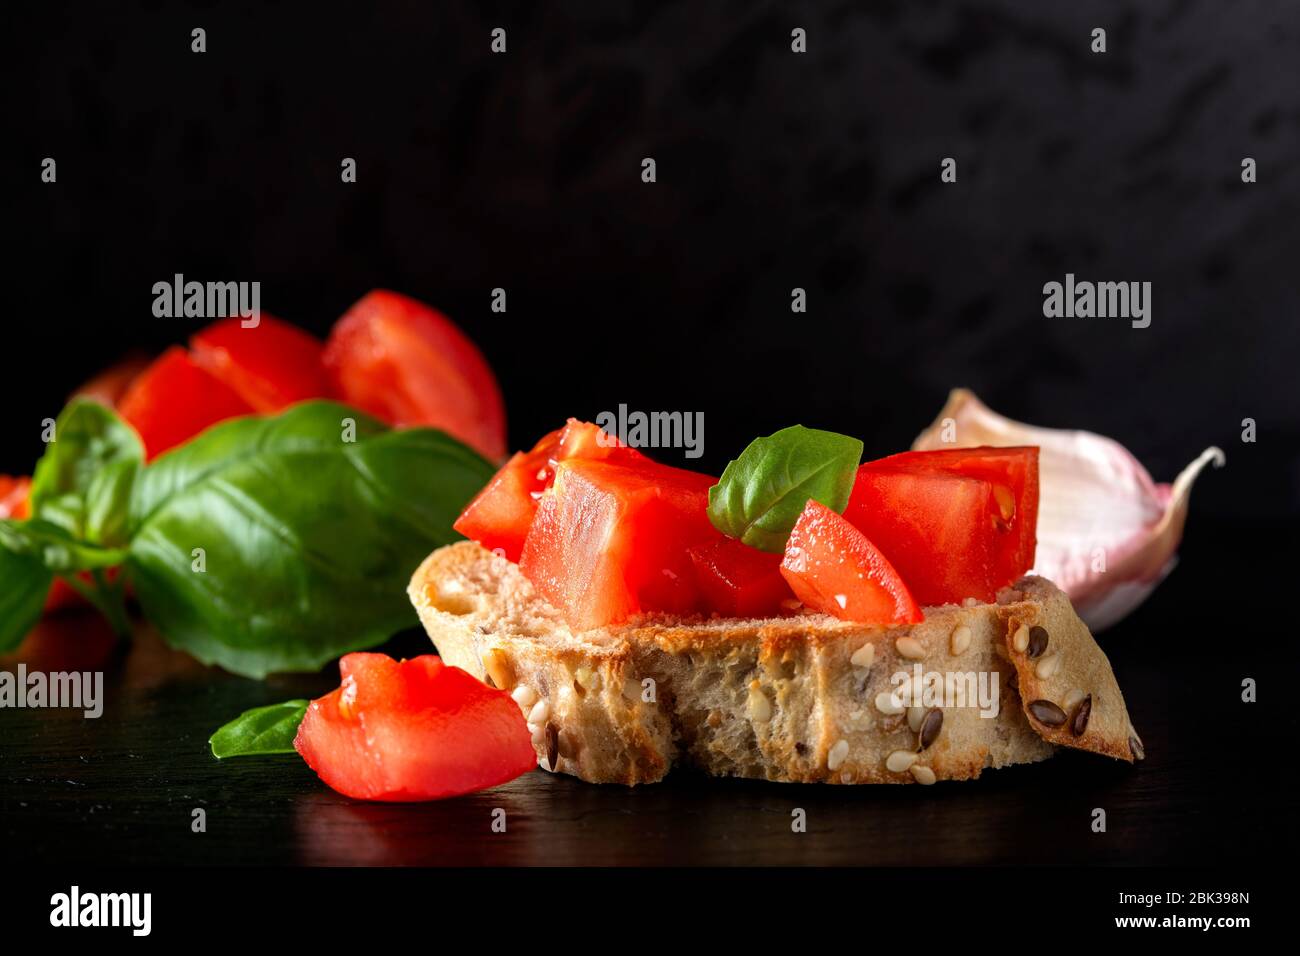 Bruschetta with tomatoes and herbs Stock Photo